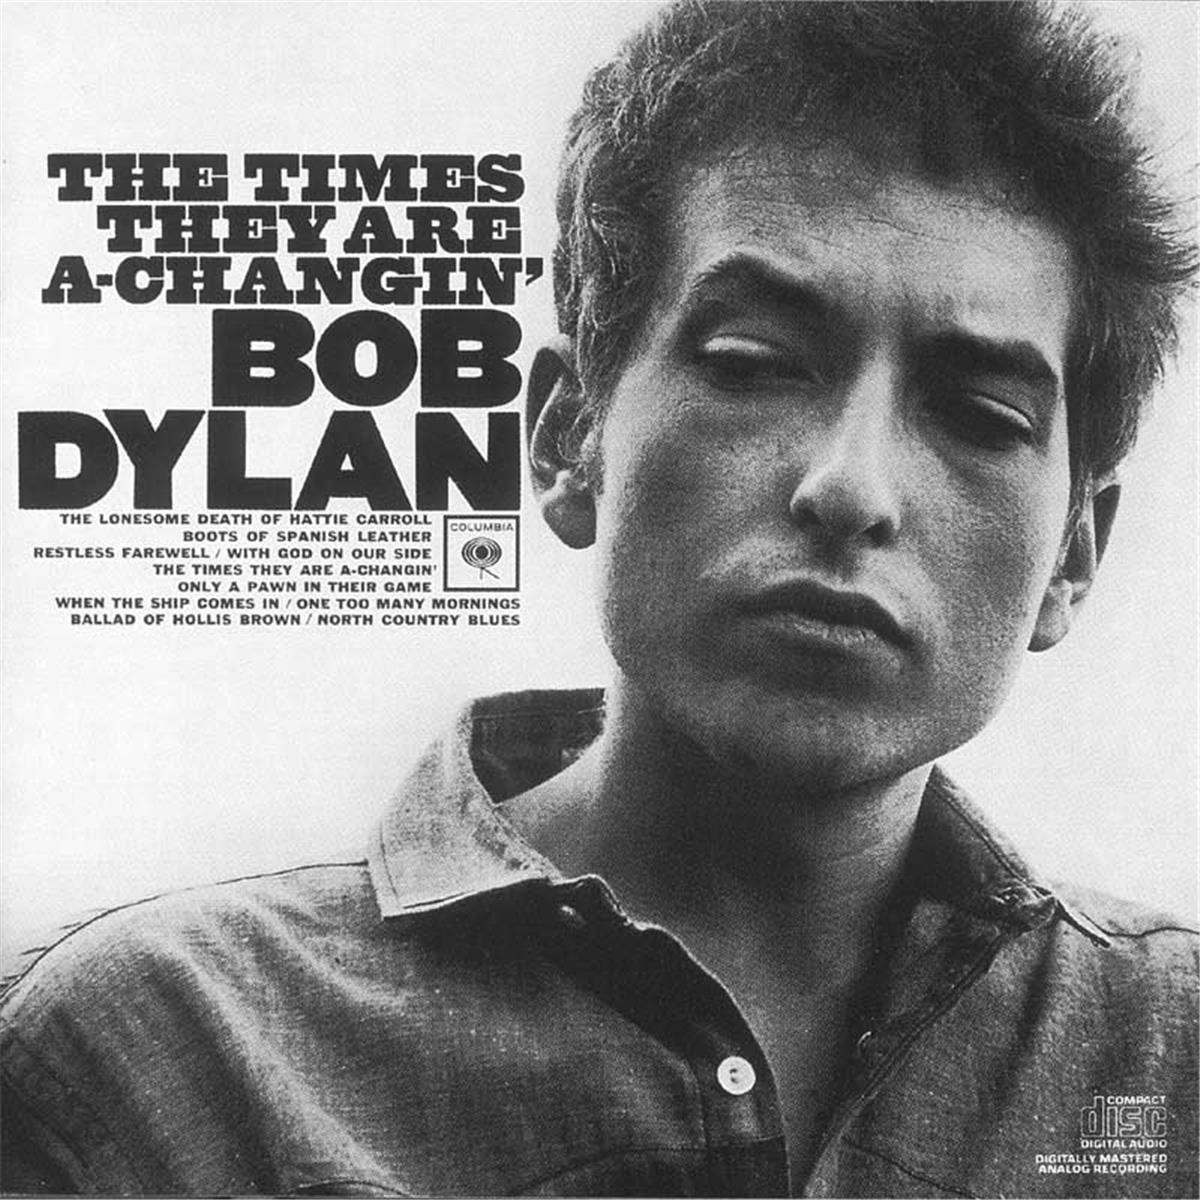 Bob Dylan ("The Times They Are A-Changin')